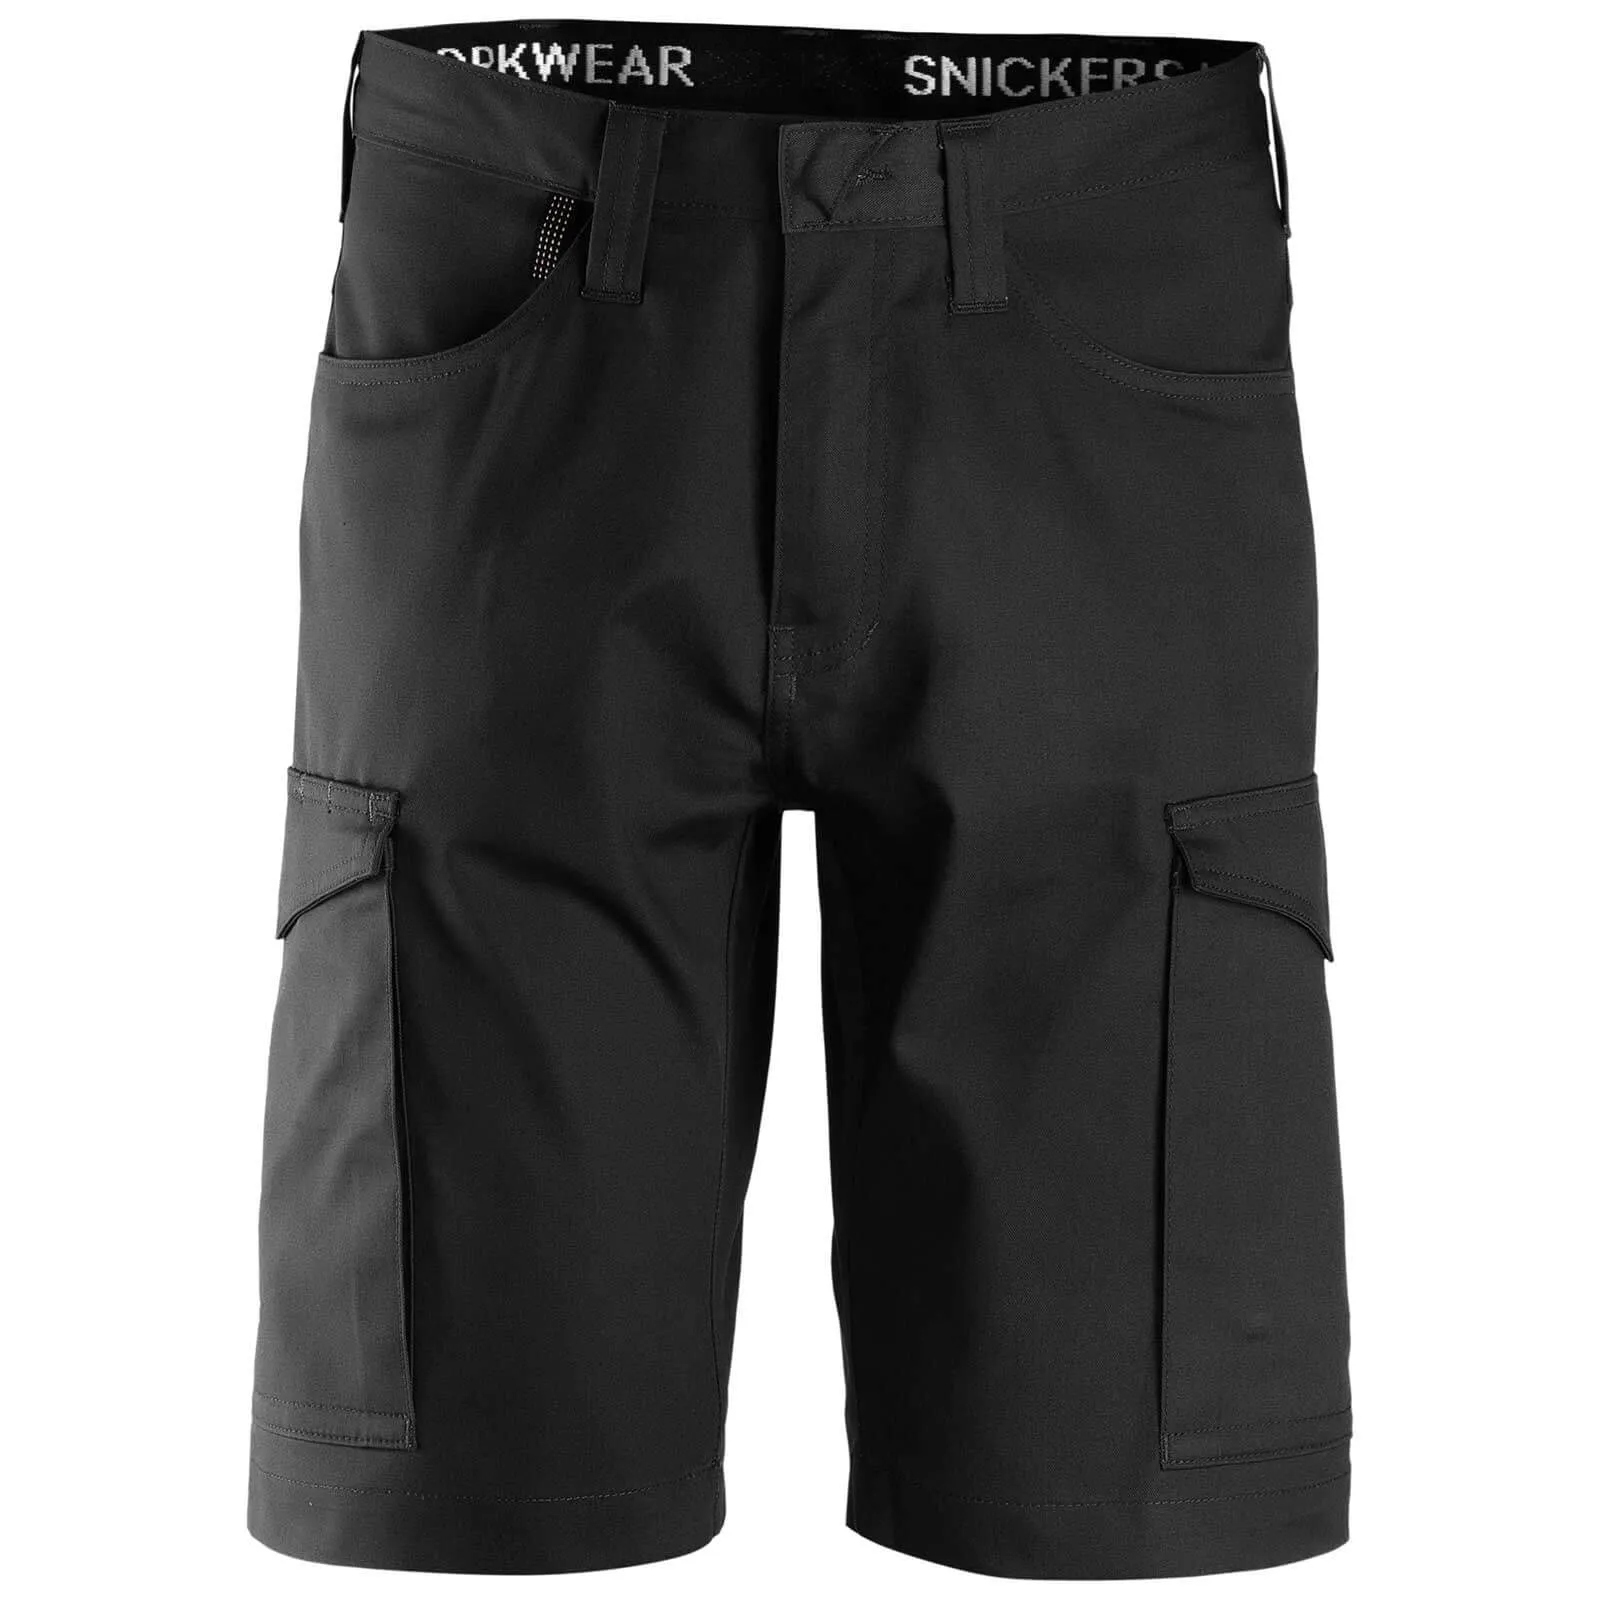 Snickers 6100 Mens Service Shorts - Black, 39"